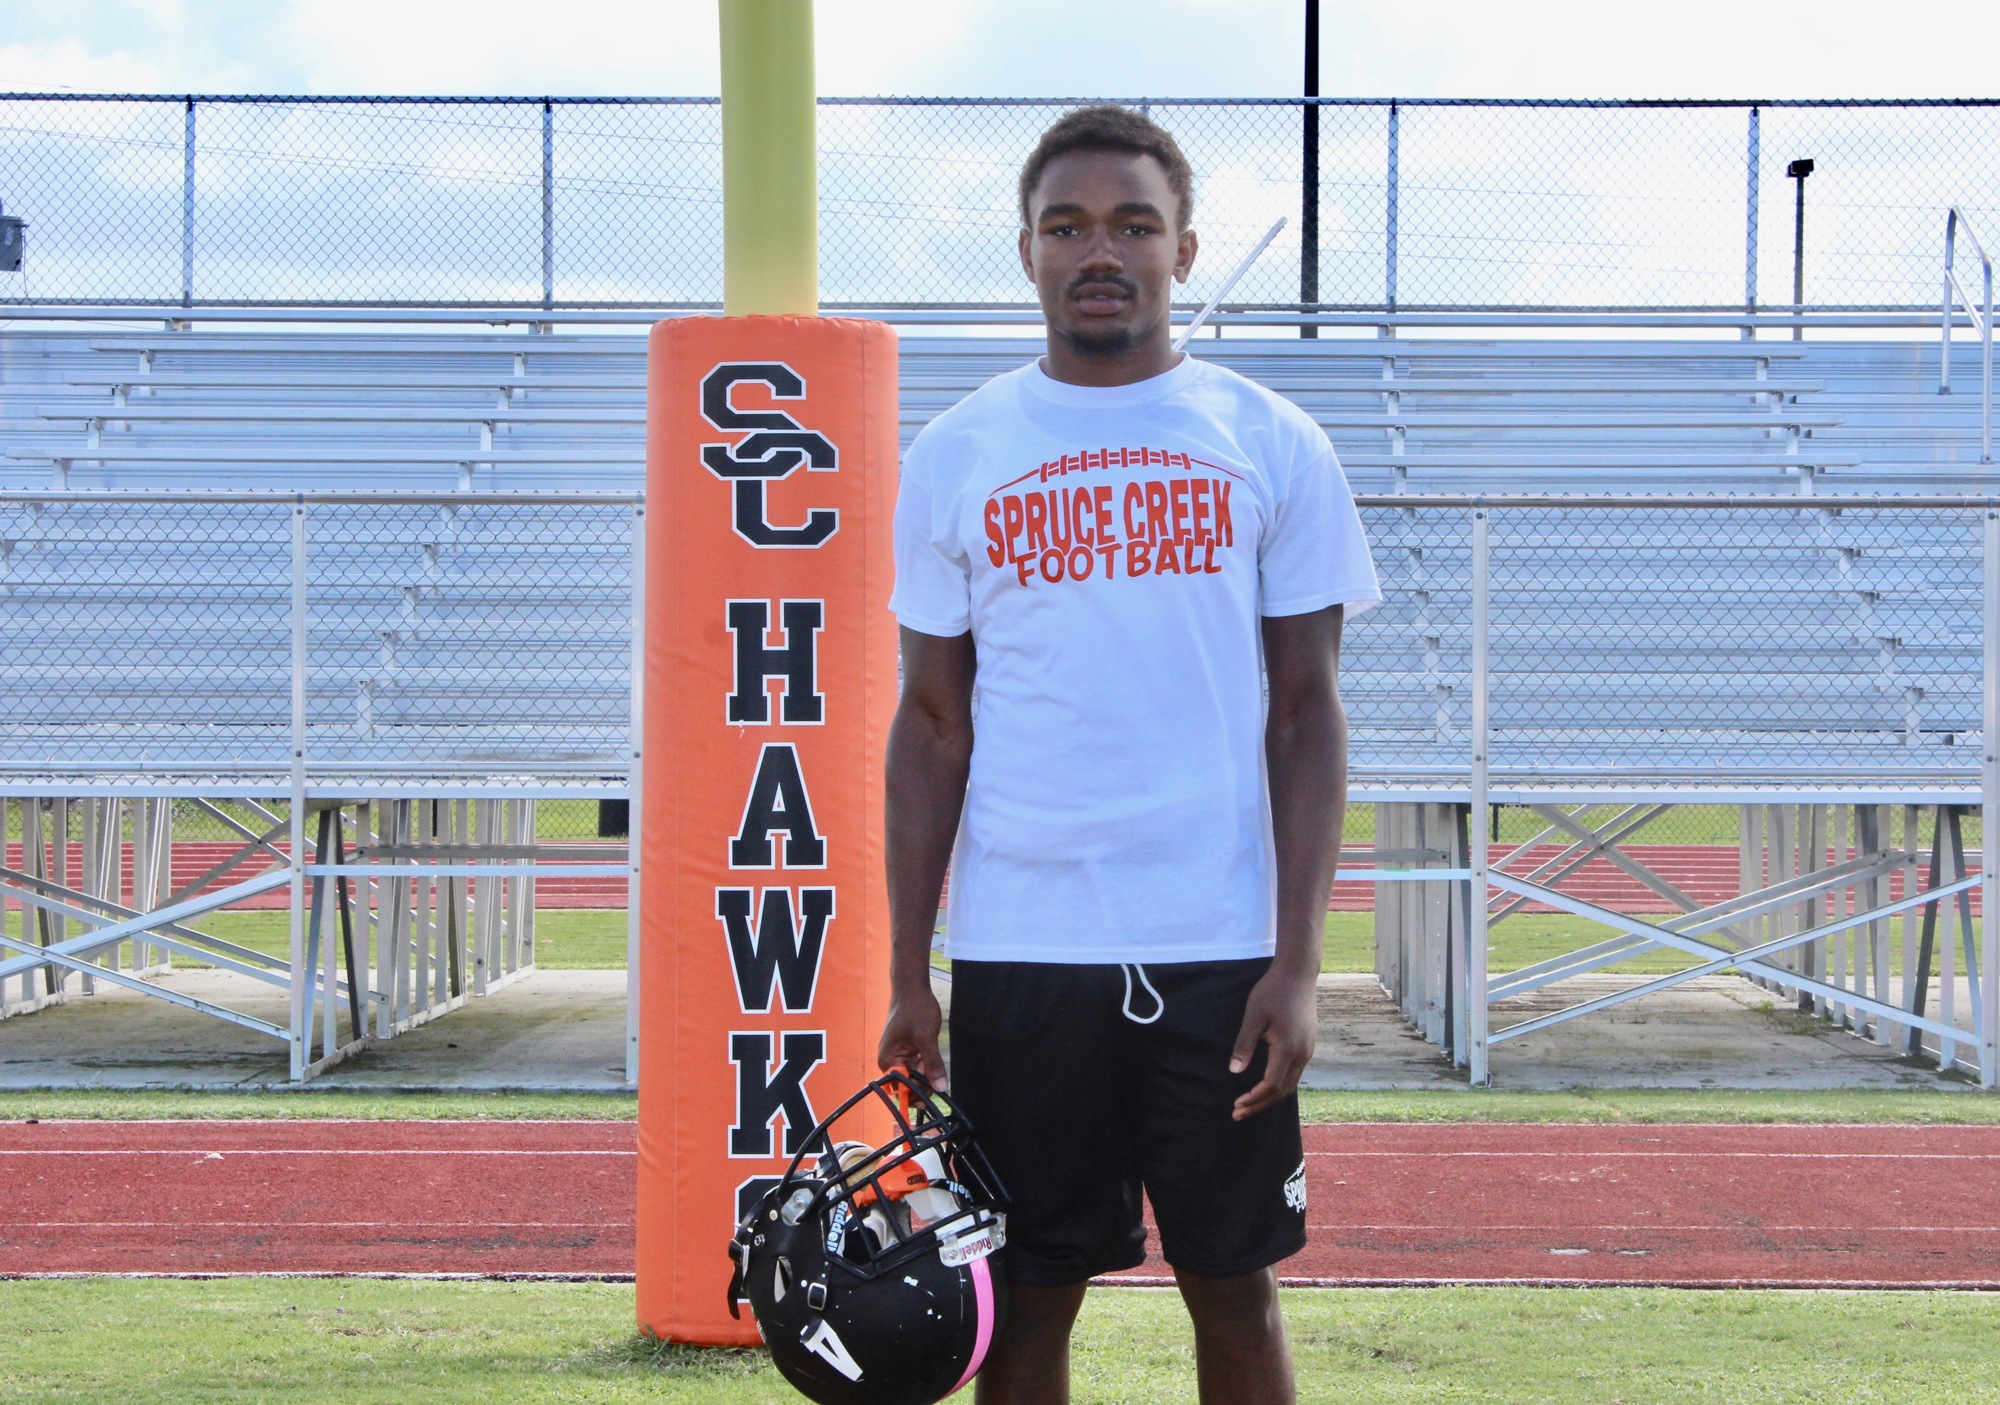 Spruce Creek running back Jacquez Lord after practice. Photo by Ray Boone